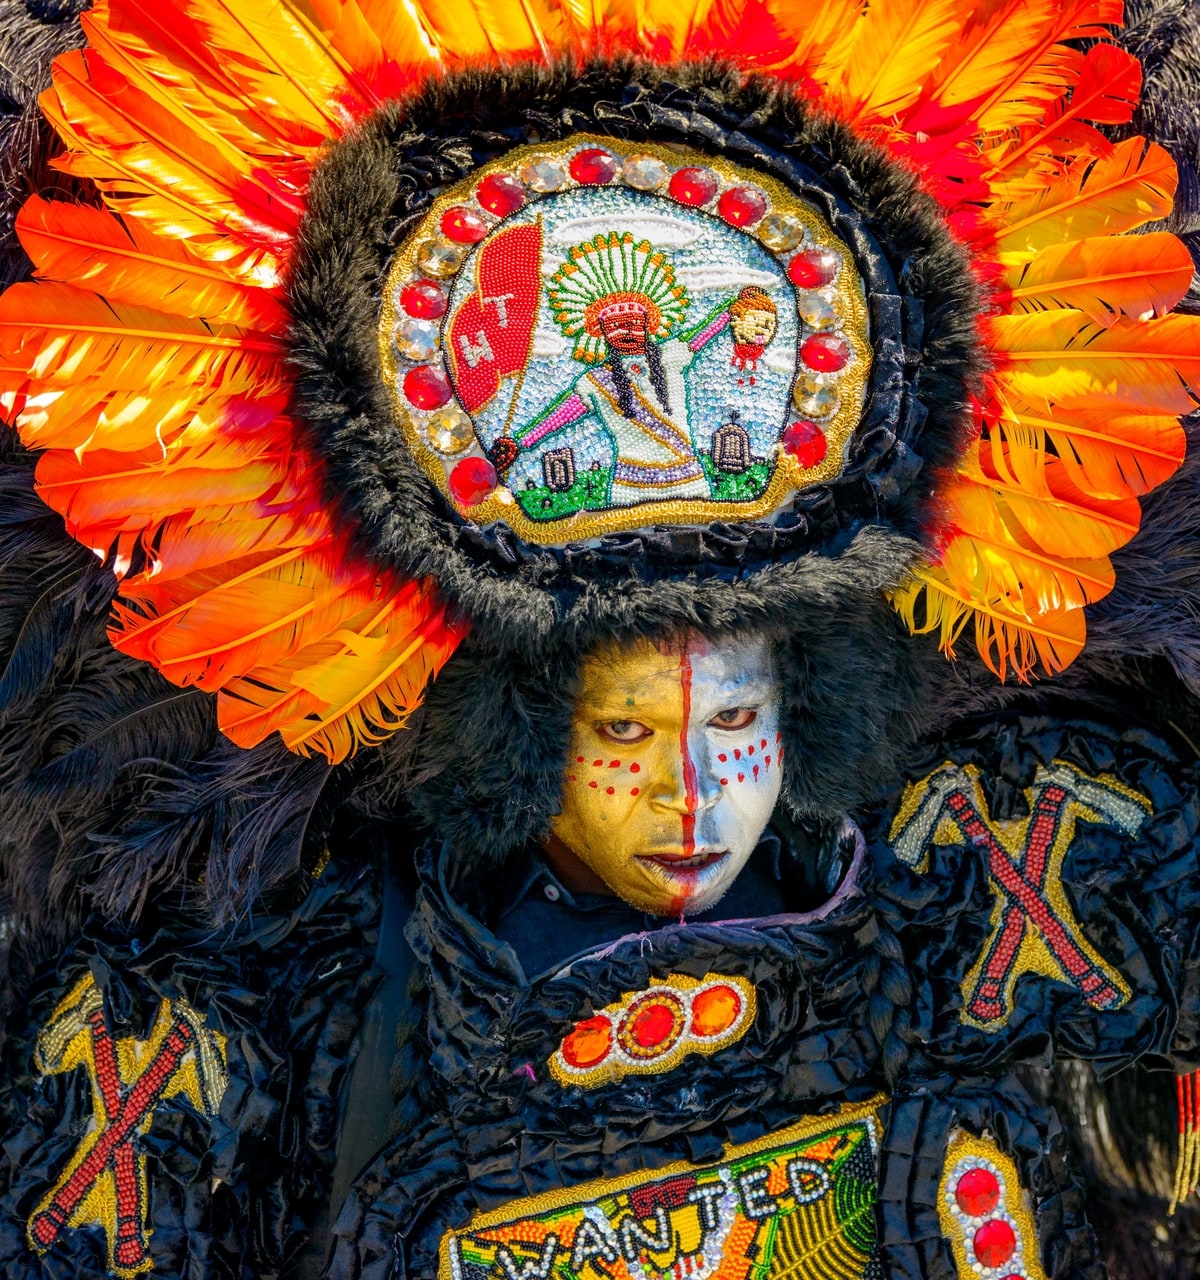 Mardi Gras Indians including Flag Boy Giz Hartley Aguillard of the Wild Tchoupitoulas take part in the West Bank Super Sunday in the Algiers neighborhood in New Orleans, La. Sunday, April 14, 2019.